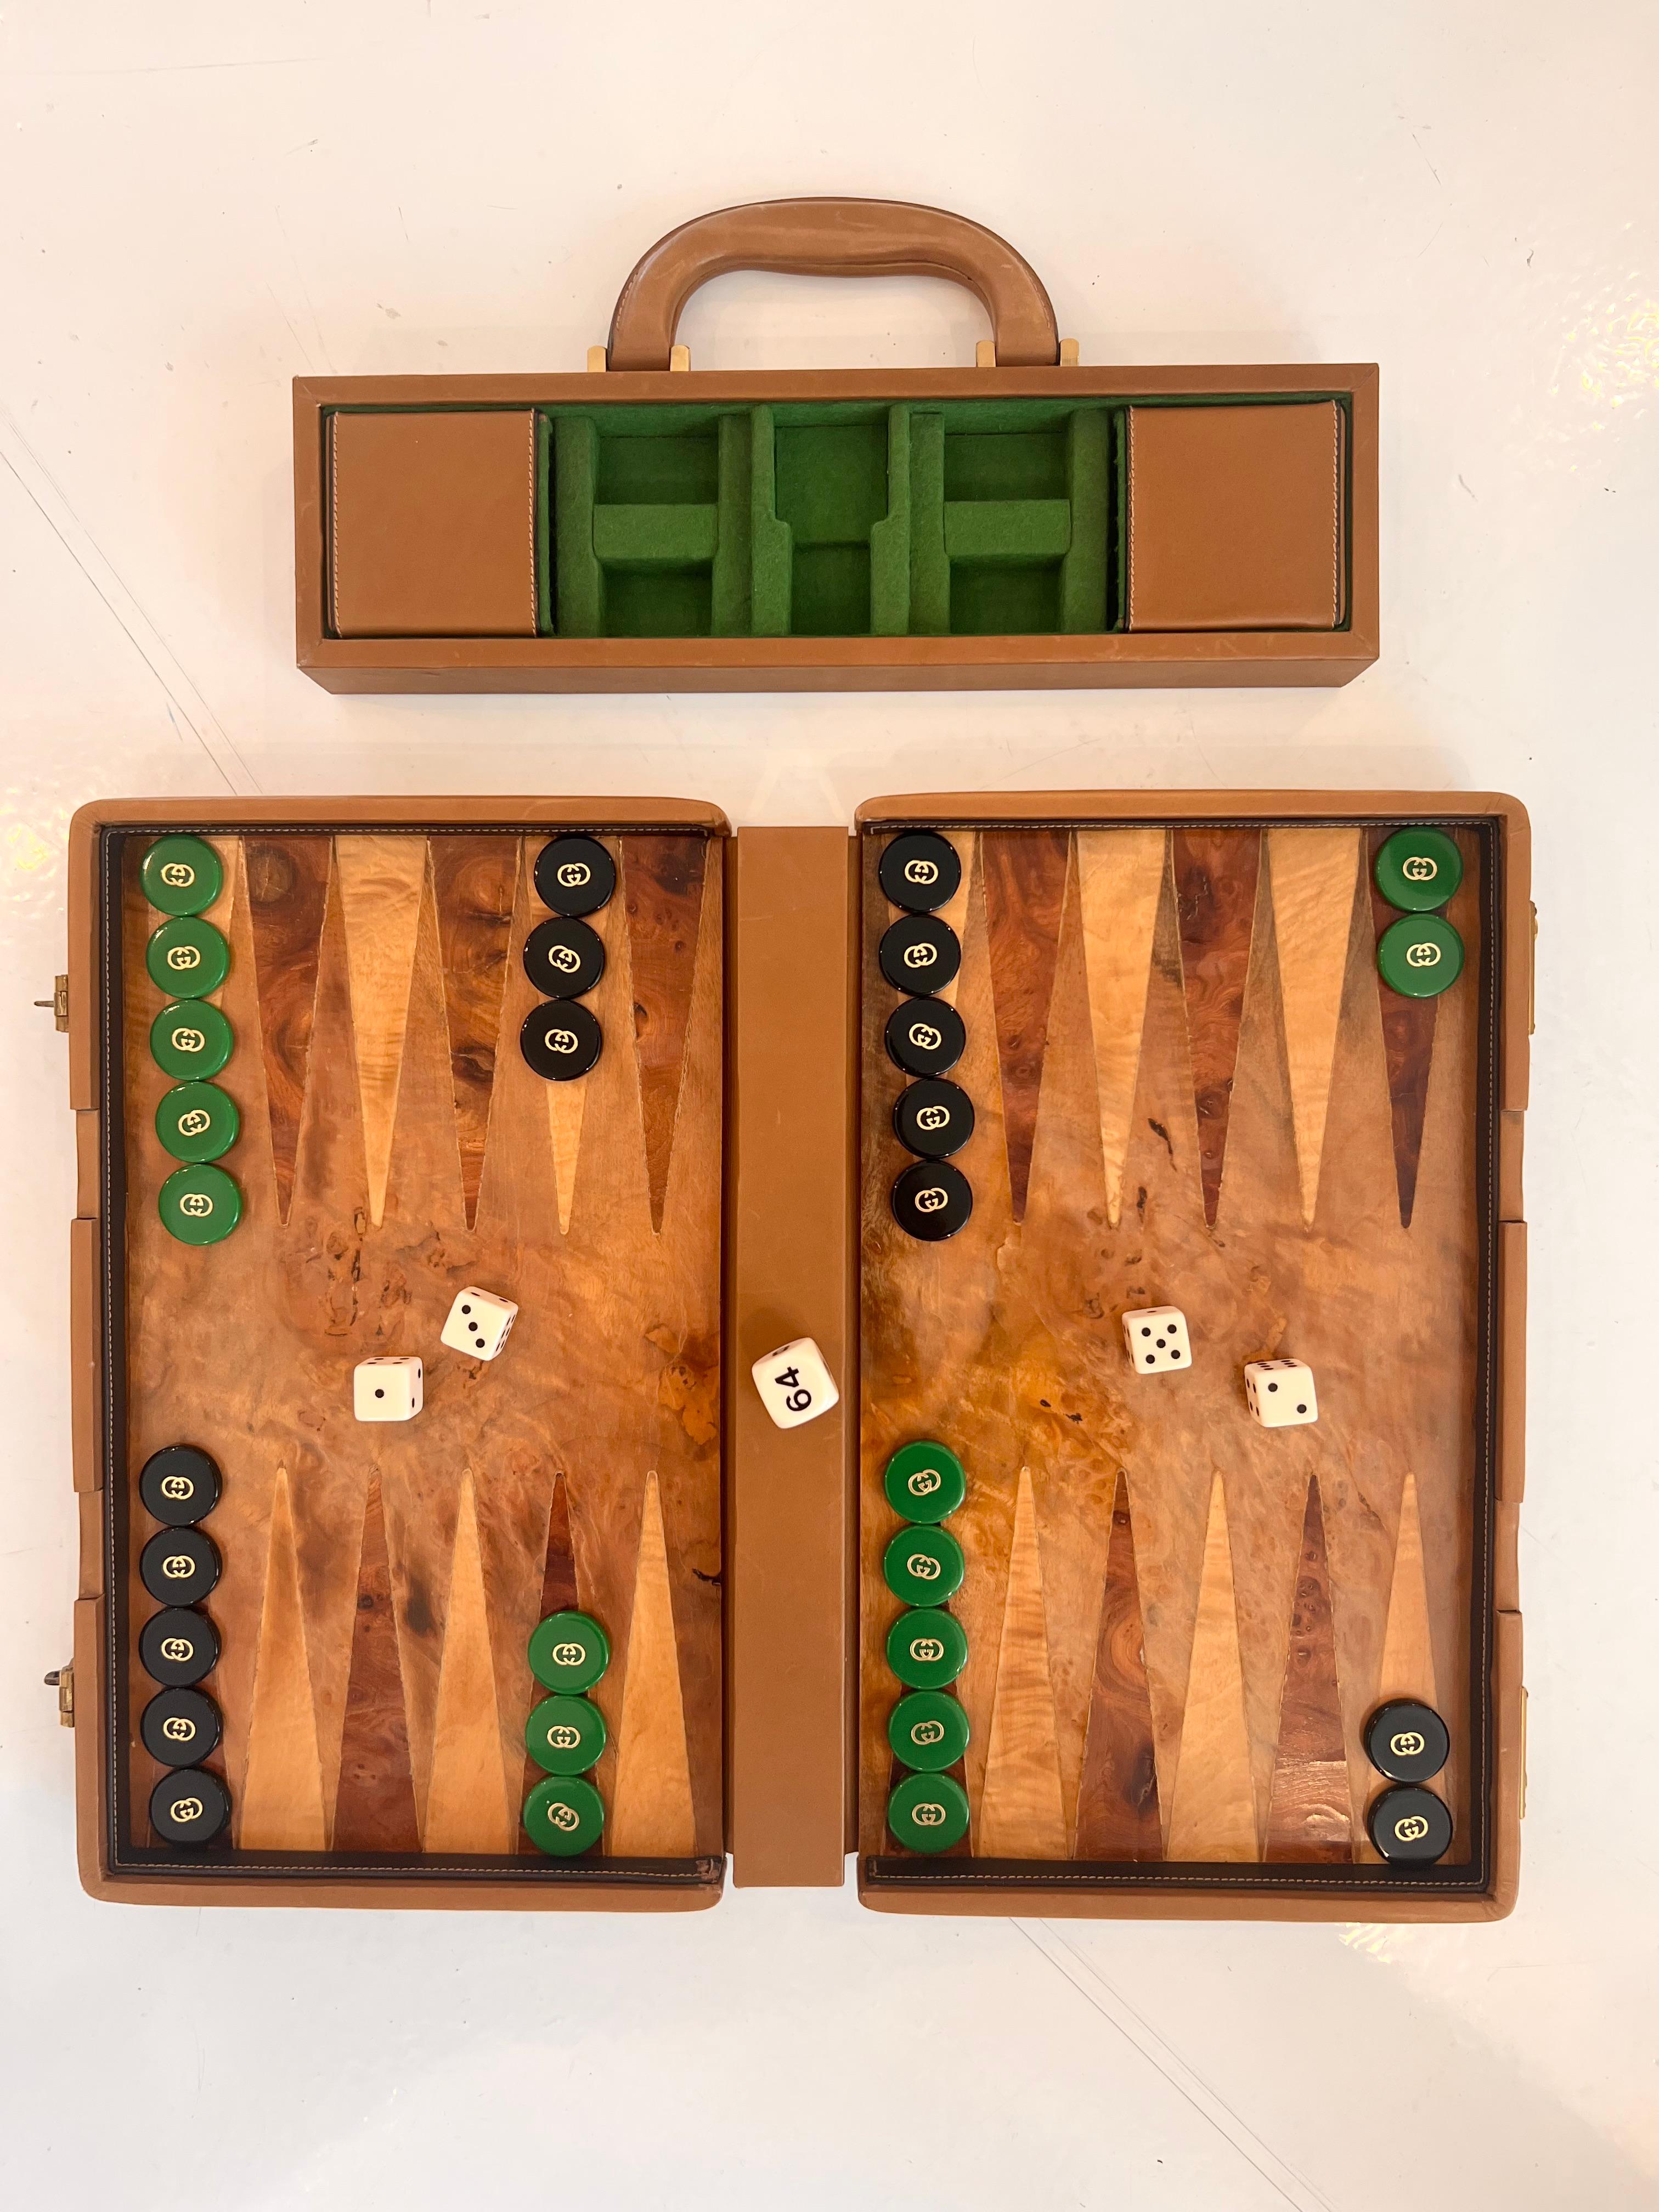 Vintage portable Gucci backgammon case/game. Tan leather trim with Burl wood on front and back of case and Burl wood game board/playing surface. 15 green and 15 black backgammon pips all present and in perfect condition. All with double G Gucci logo